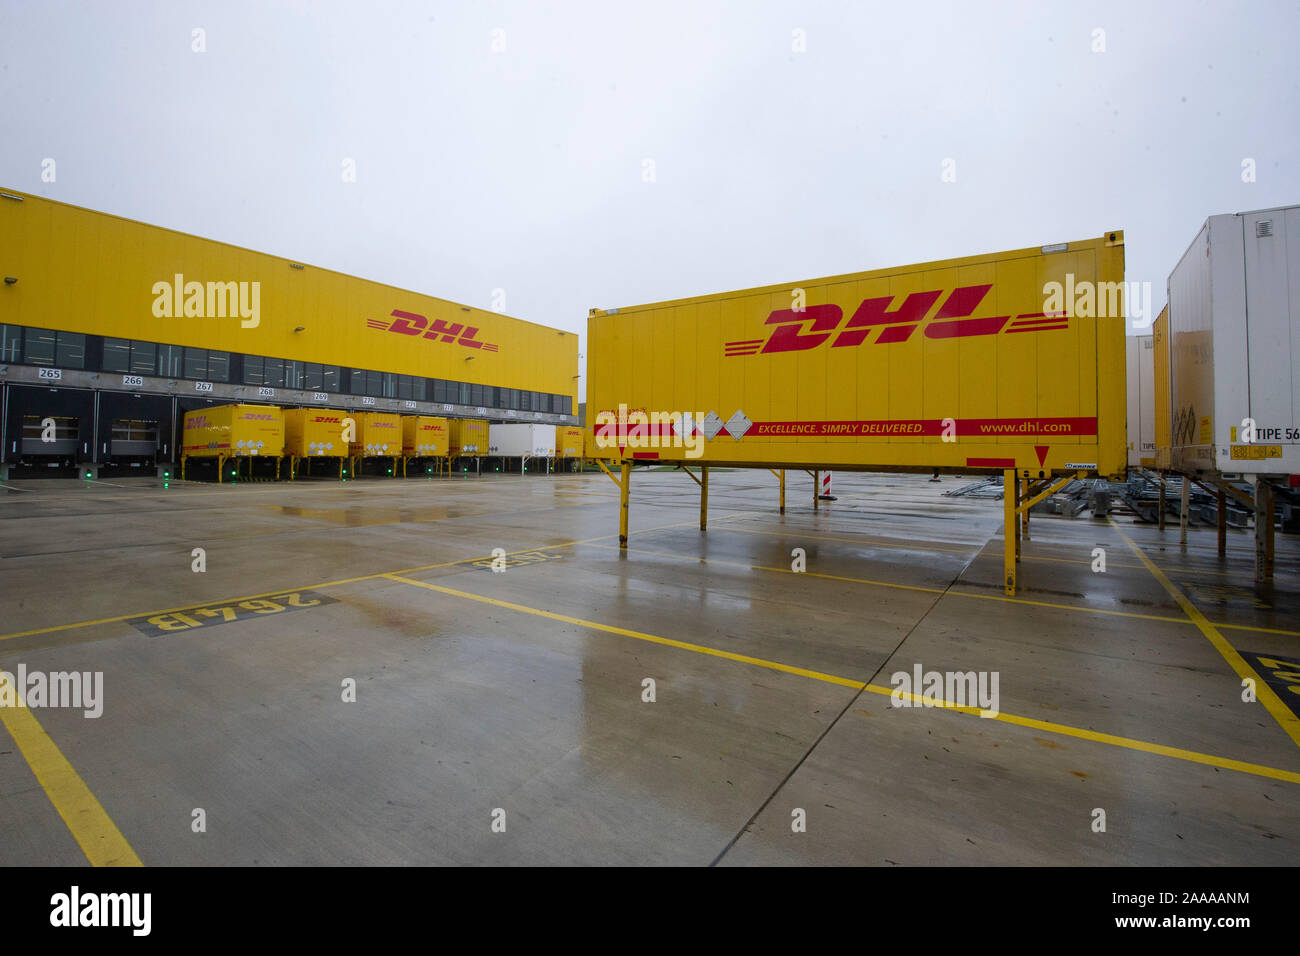 Bochum, Deu, Deutschland, Germany. 18th Nov, 2019. Exterior of the parcel center with loading bridges, containers at the truck ramps. Commissioning of the new mega parcel center of the Deutsche Post DHL Group in Bochum, 18.11.2019. © Sven Simon Photo Agency GmbH & Co. Press Photo KG # Prinzess-Luise-Str. 41 # 45479 M uelheim/Ruhr # Tel. 0208/9413250 # Fax. 0208/9413260 # GLS Bank # BLZ 430 609 67 # Kto. 4030 025 100 # IBAN DE75 4306 0967 4030 0251 00 # BIC GENODEM1GLS # www.svensimon.net. Credit: dpa/Alamy Live News Stock Photo